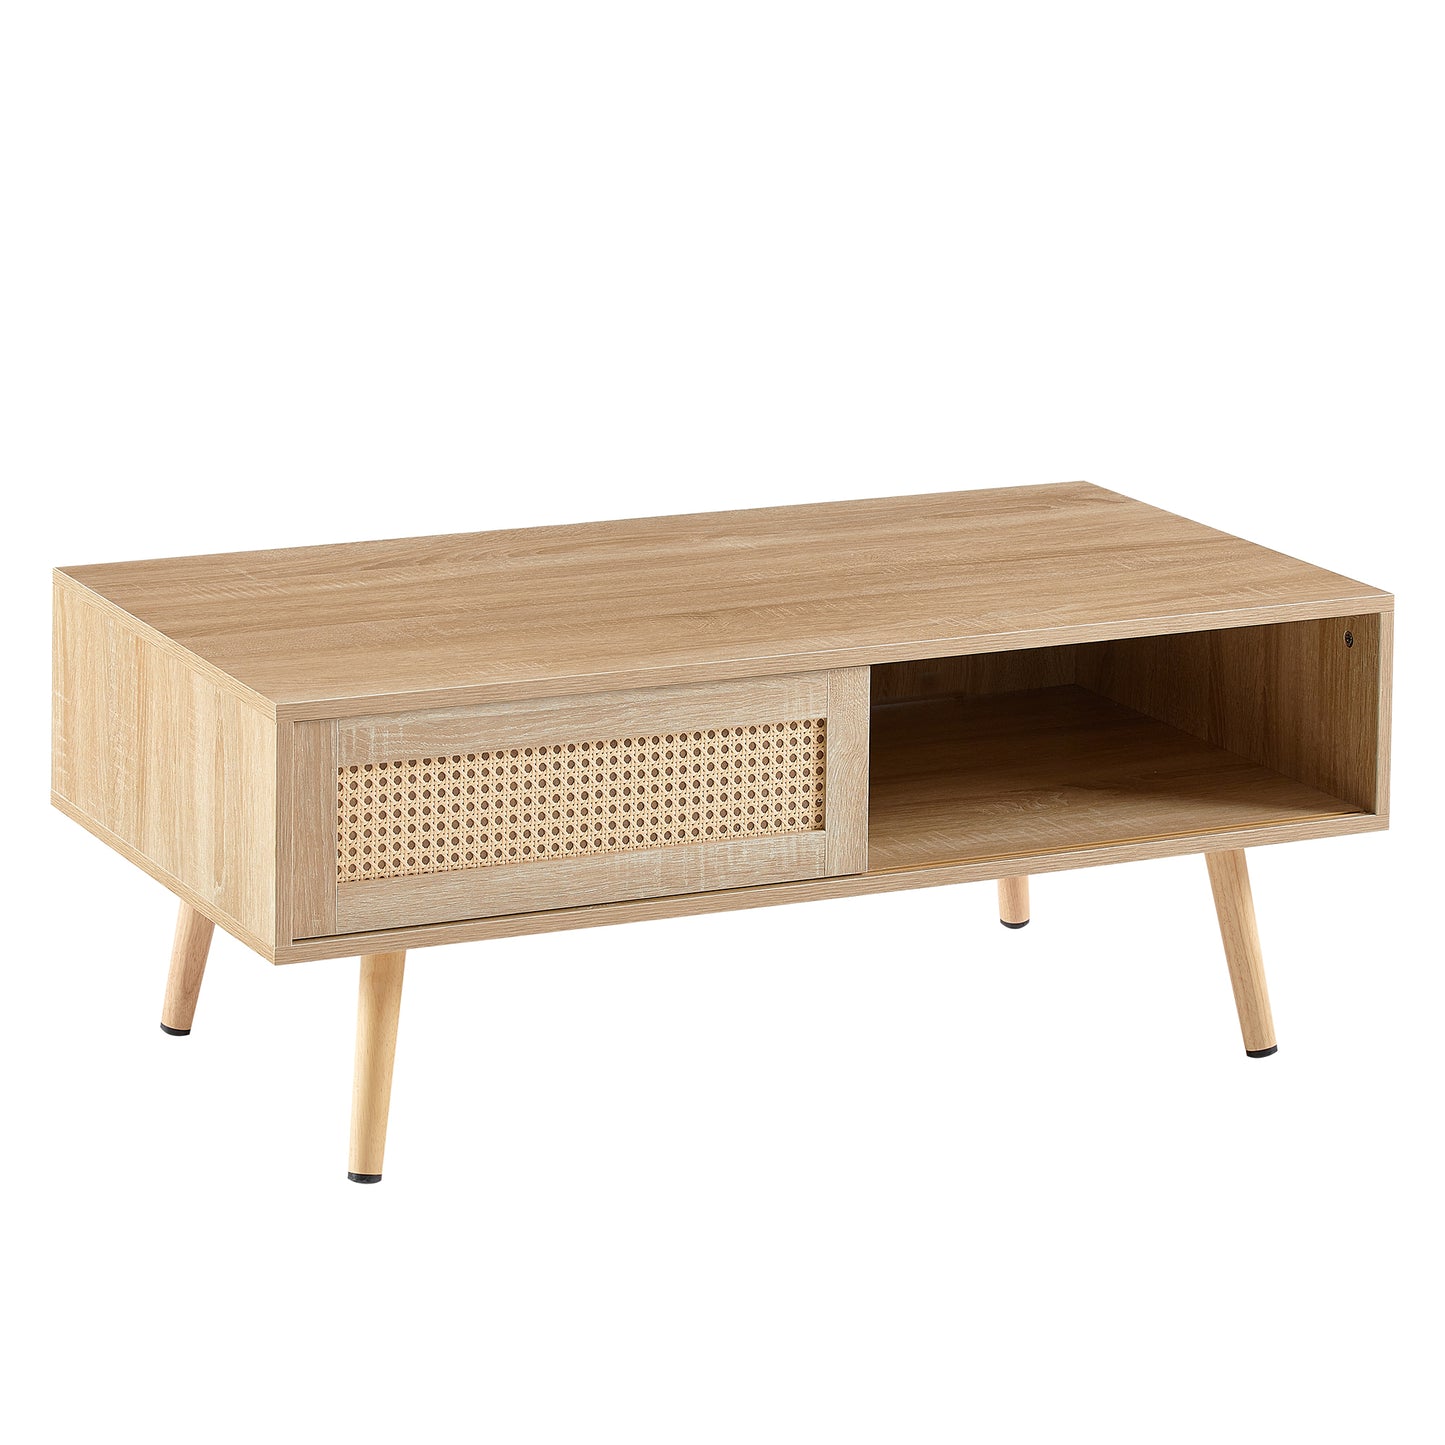 41.34" Rattan Coffee table, sliding door for storage, solid wood legs, Modern table  for living room , natural